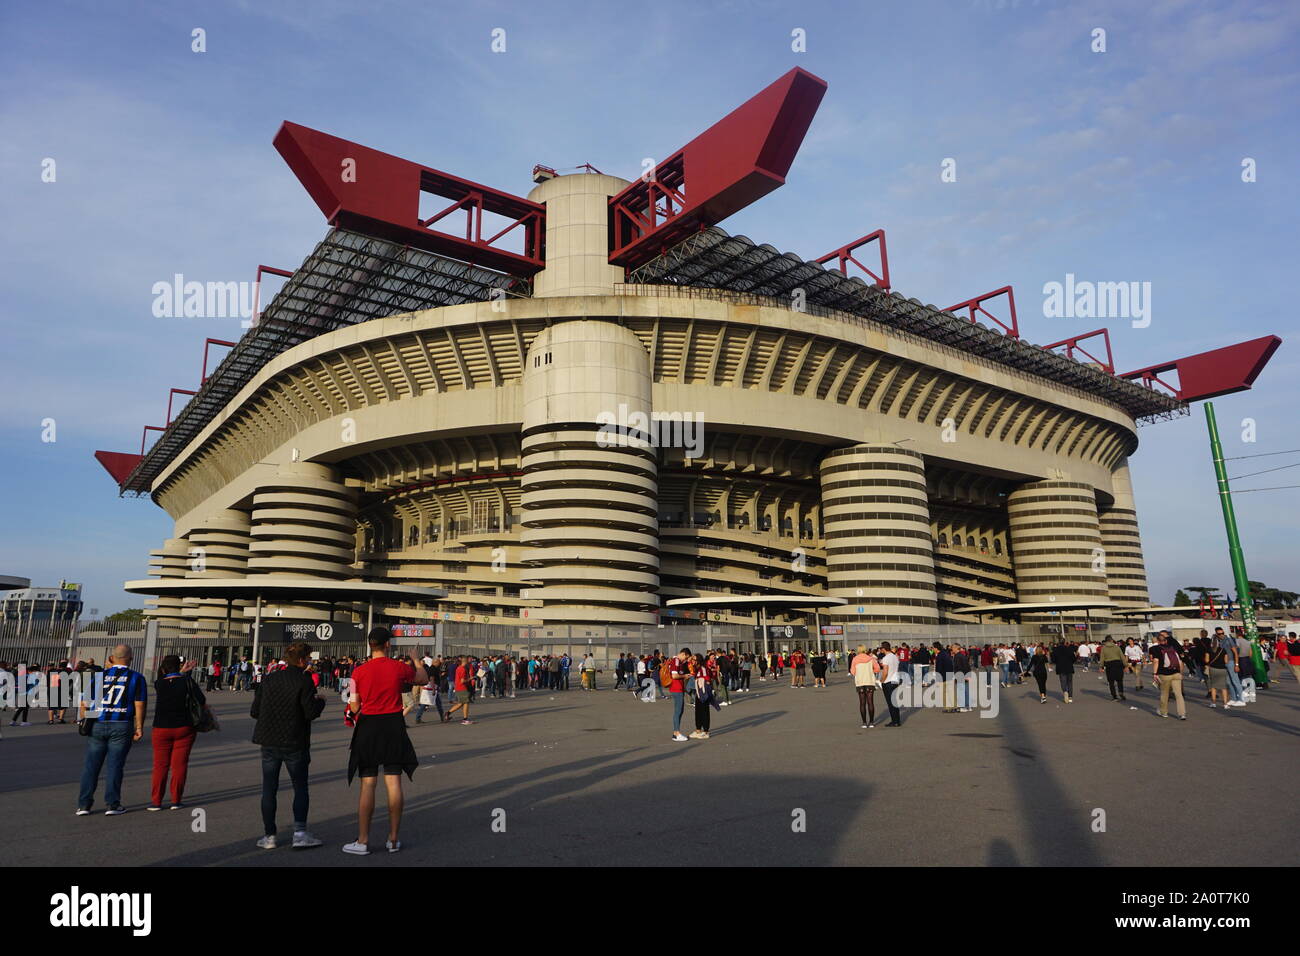 Milan, Italy. 21st Sep, 2019. MILAN, ITALY - SEPTEMBER 21: General view of the Stadio San Siro ahead of the Seria A match between AC Milan vs FC Internazionale at Stadio San Siro, Stadio Giuseppe Meazza on September 21, 2019 in Milan, Italy. Credit: Daniela Porcelli/SPP/Alamy Live News Stock Photo